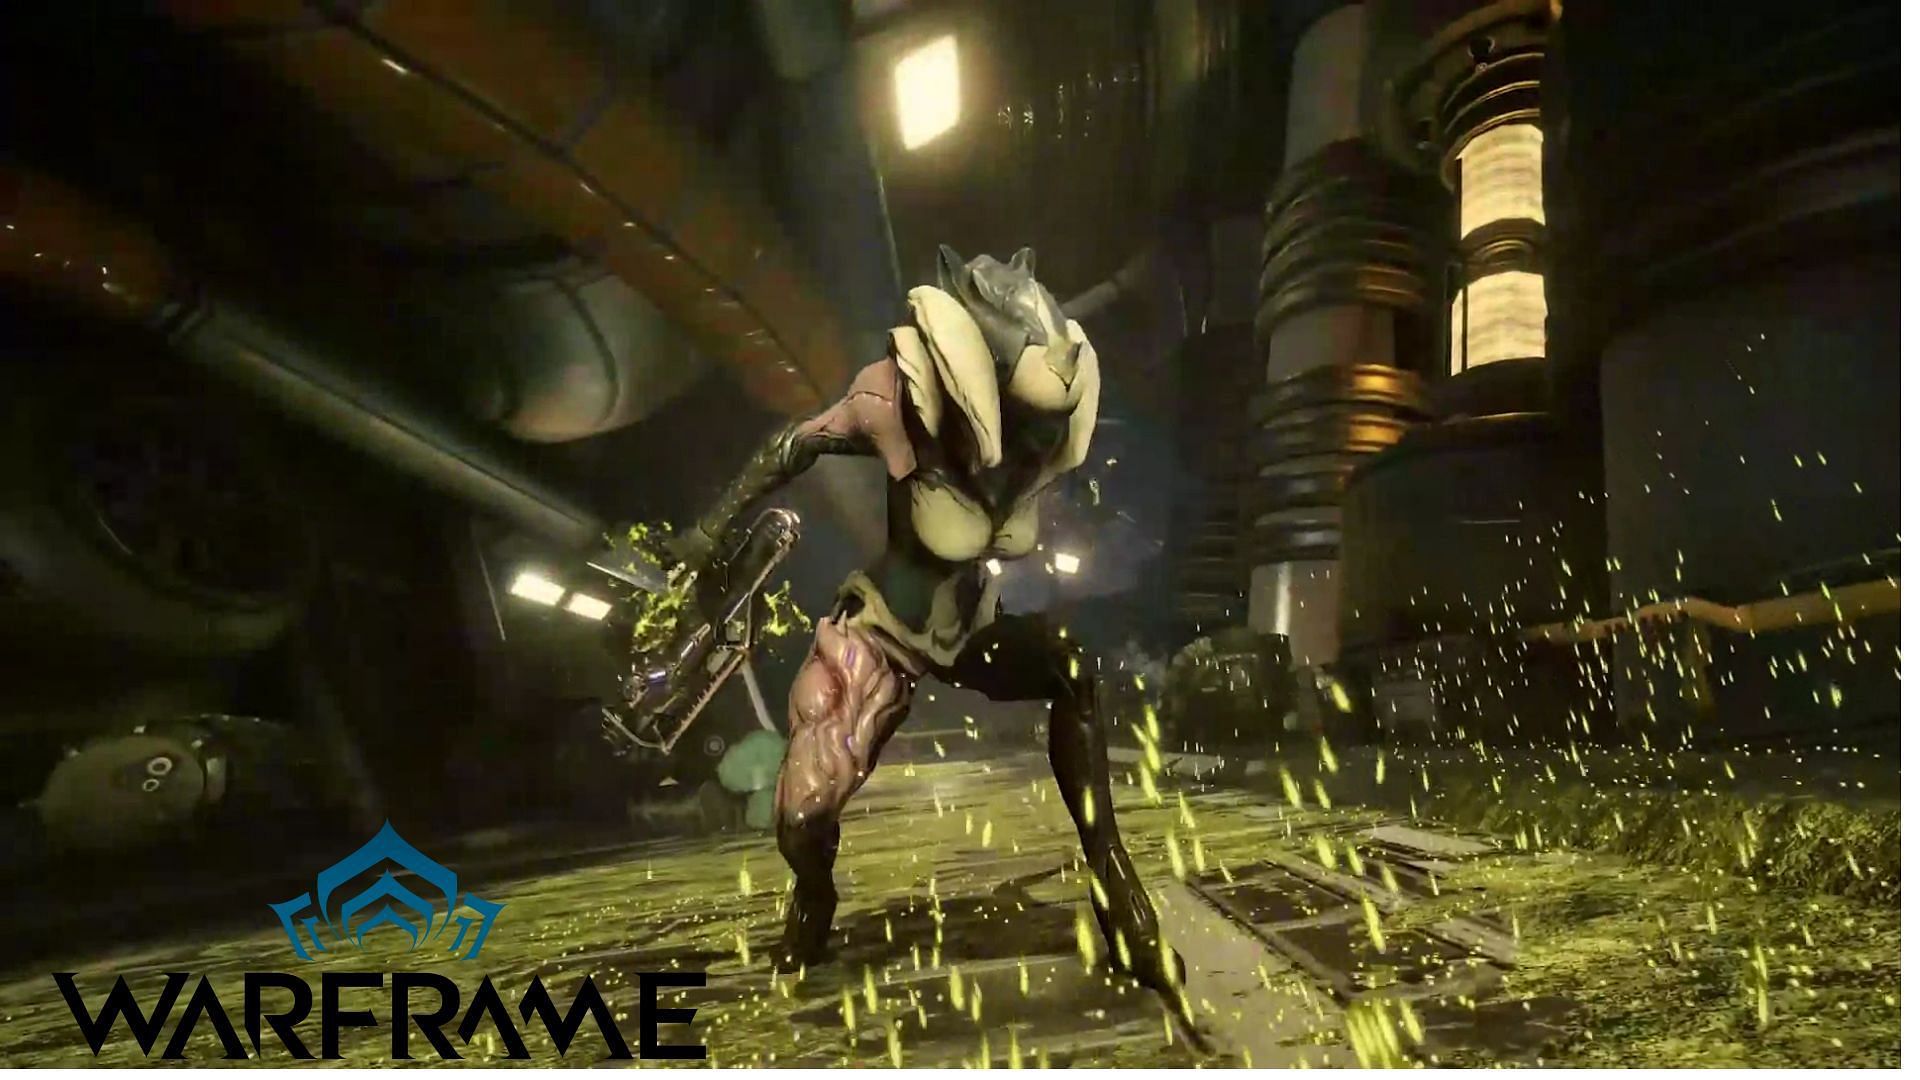 Saryn&#039;s damage increases as her pores spread among enemies (Image via Digital Extremes)